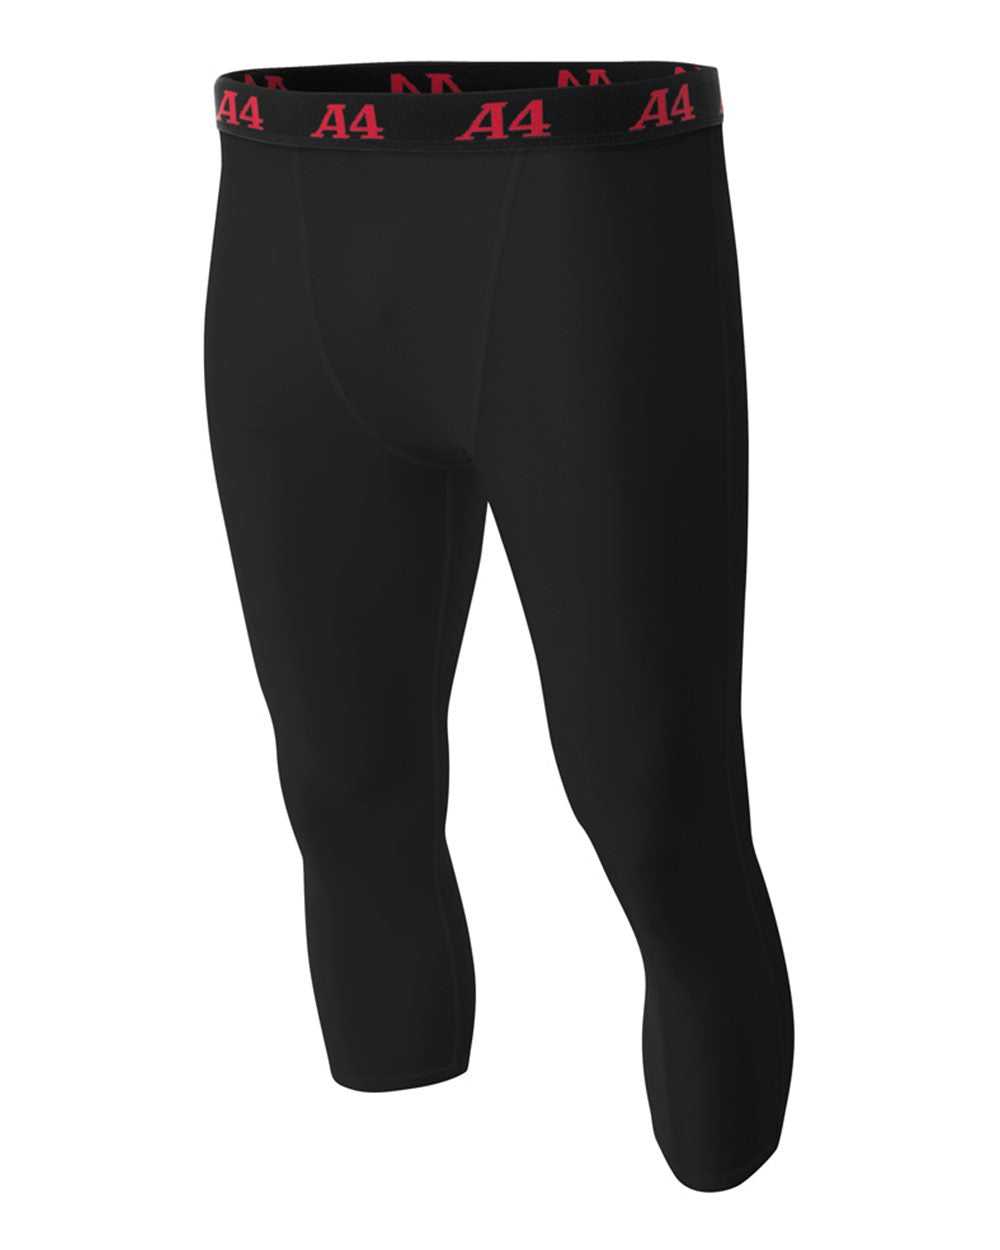 A4 NB6202 Youth Compression Tight - Black - HIT a Double